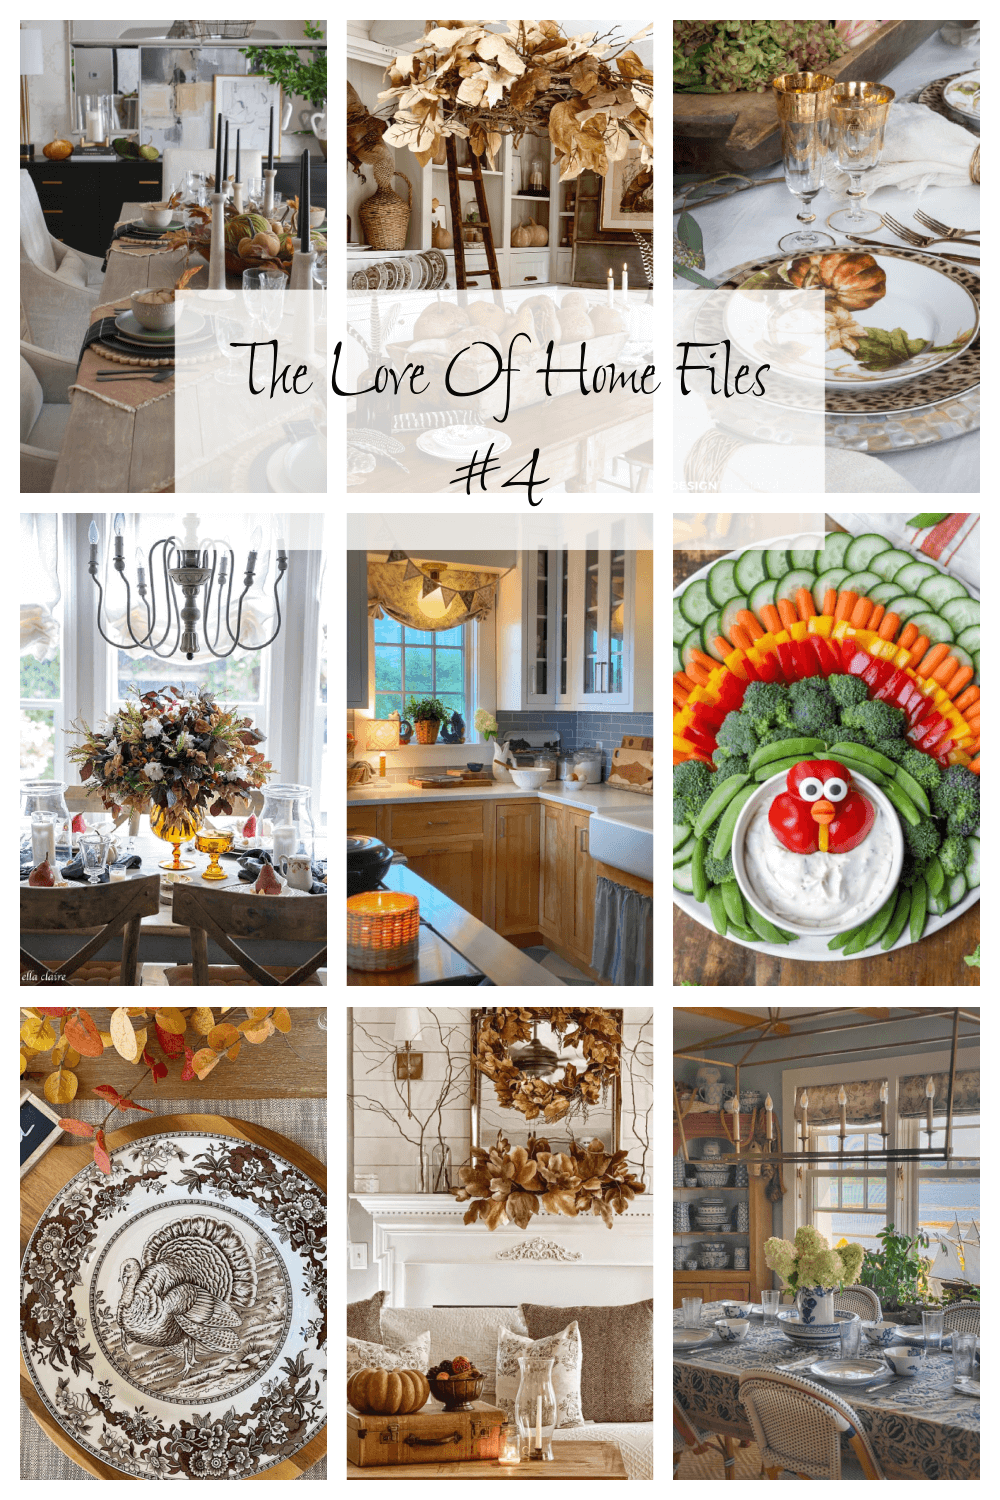 The Love Of Home Files #4